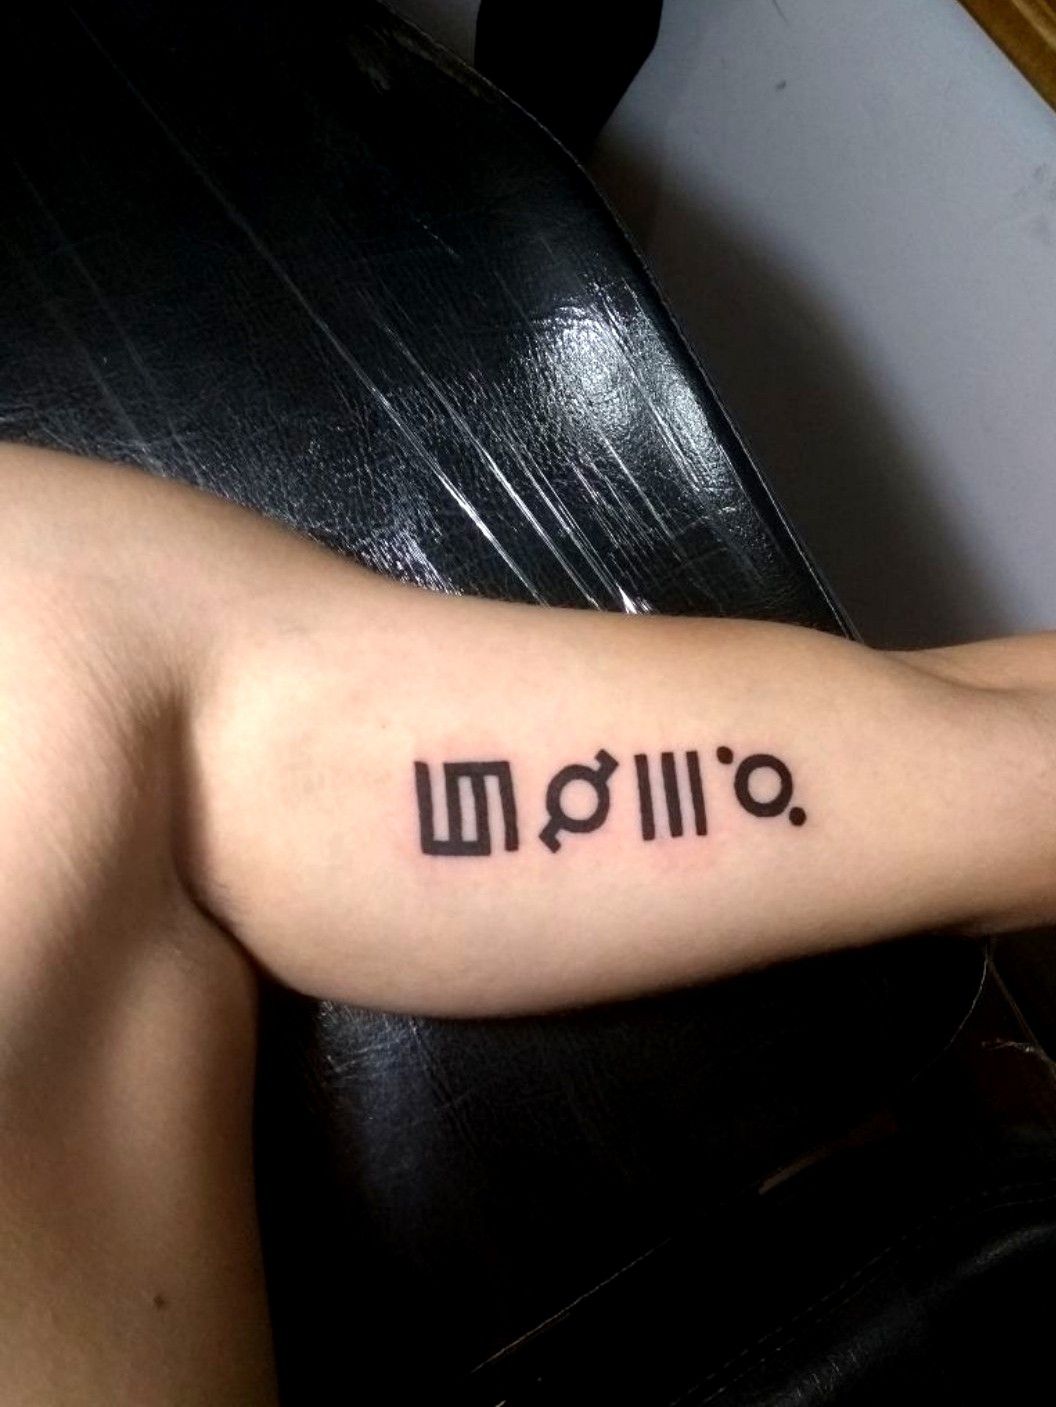 30 seconds to mars  browny soundwave tattoo  Wall Of Sound